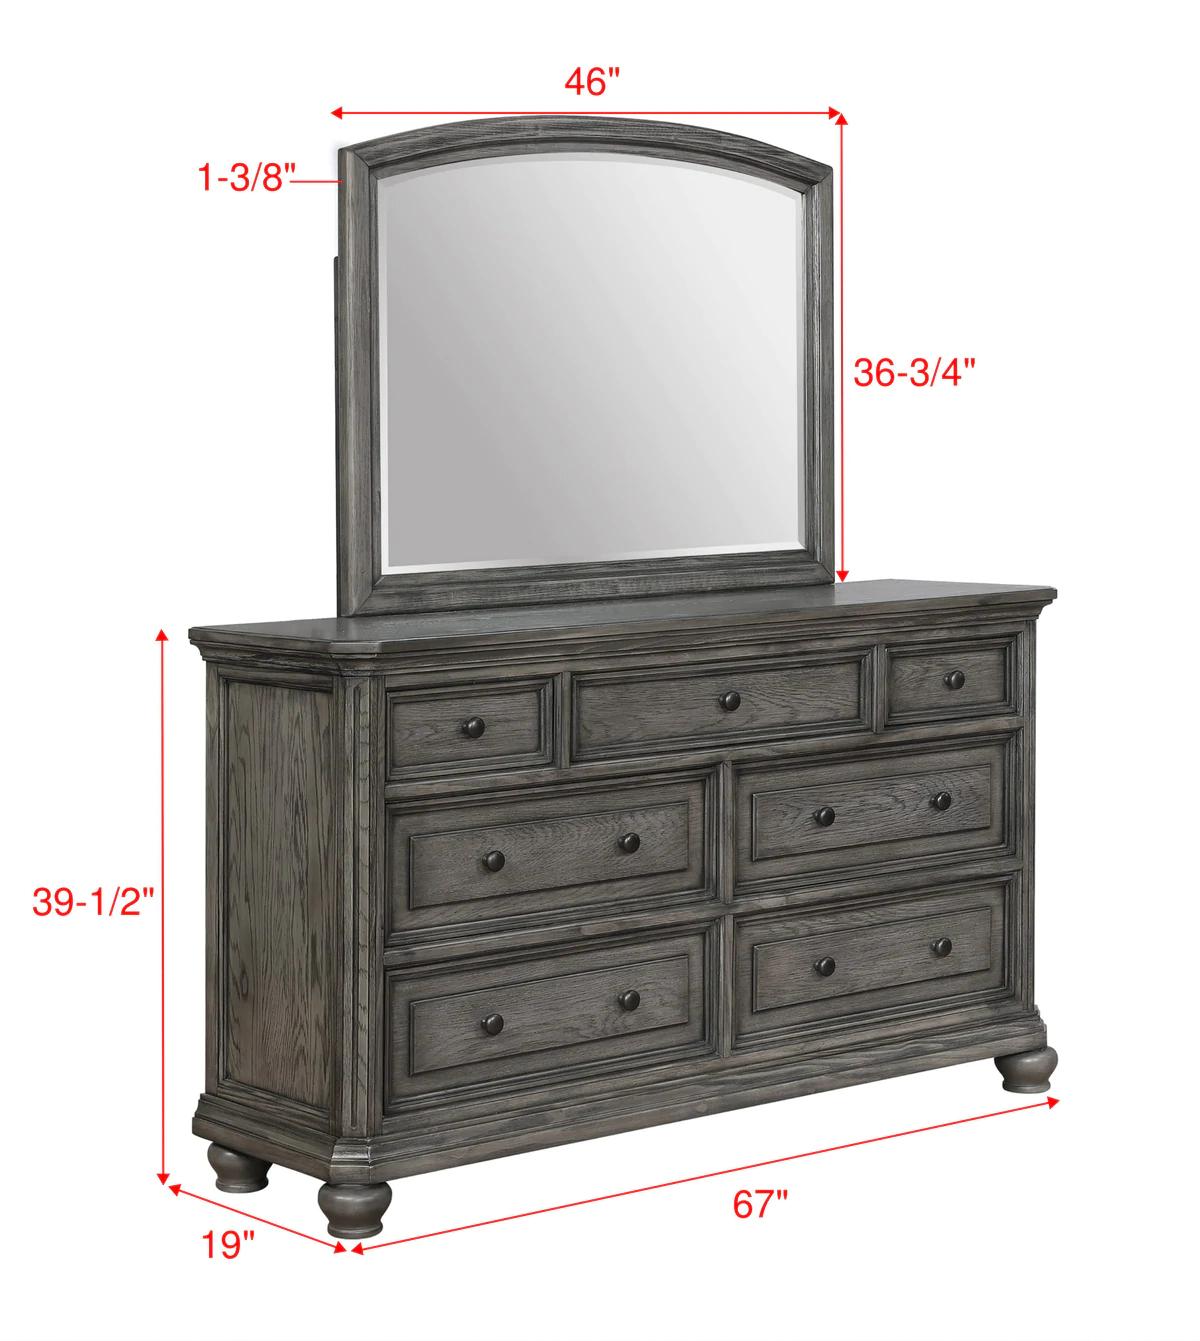 

    
B1885-K-Bed-5pcs Gray Panel Bedroom Set w/ Storage Drawers by Crown Mark Lavonia B1885-K-Bed-5pcs
